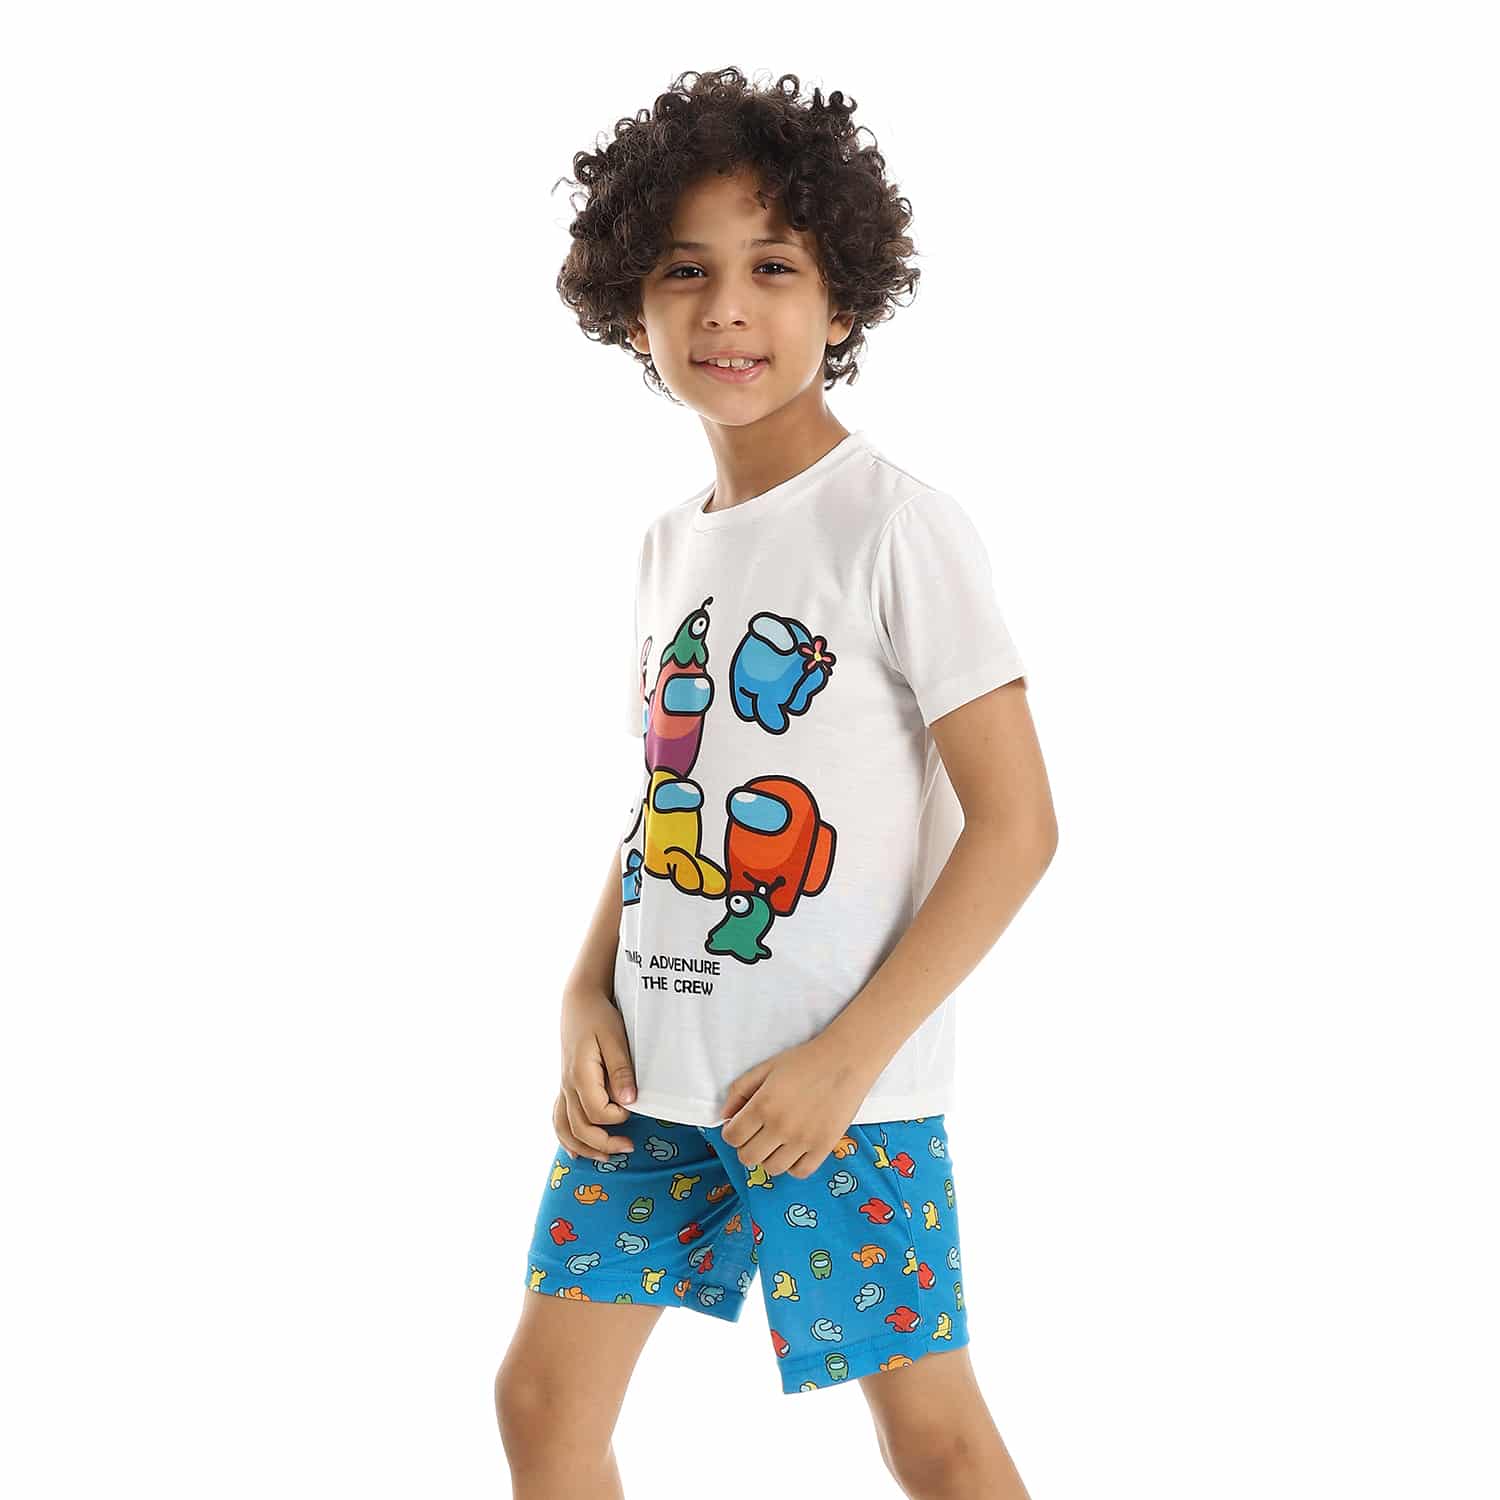 "Time For Advenure with The Crew" Self Patterned Short Sleeves Boys Pajama Set - White & Azure Blue